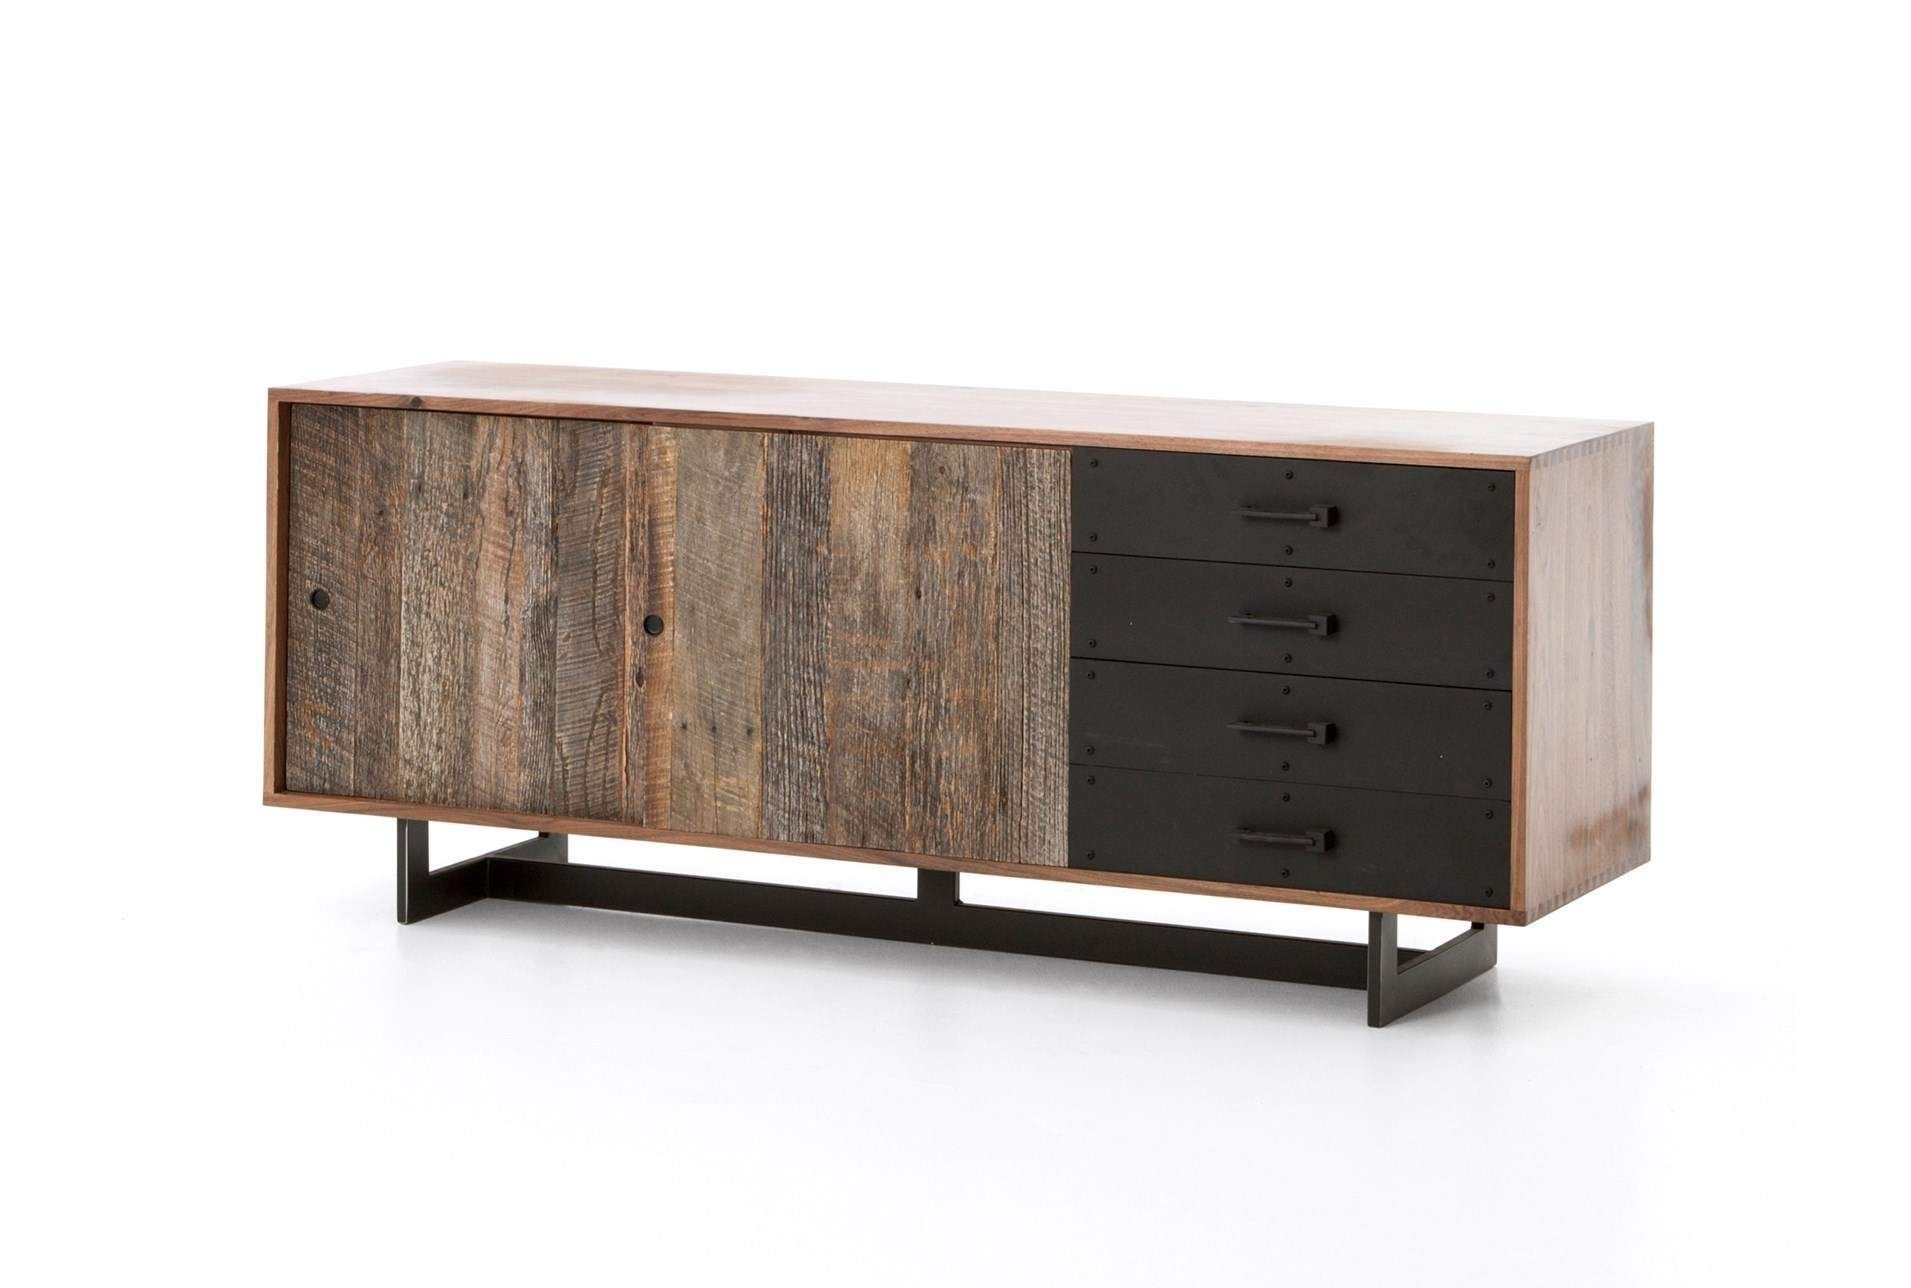 Shop For Mikelson Sideboard At Livingspaces. Enjoy Free Store In Latest Solar Refinement Sideboards (Photo 1 of 20)